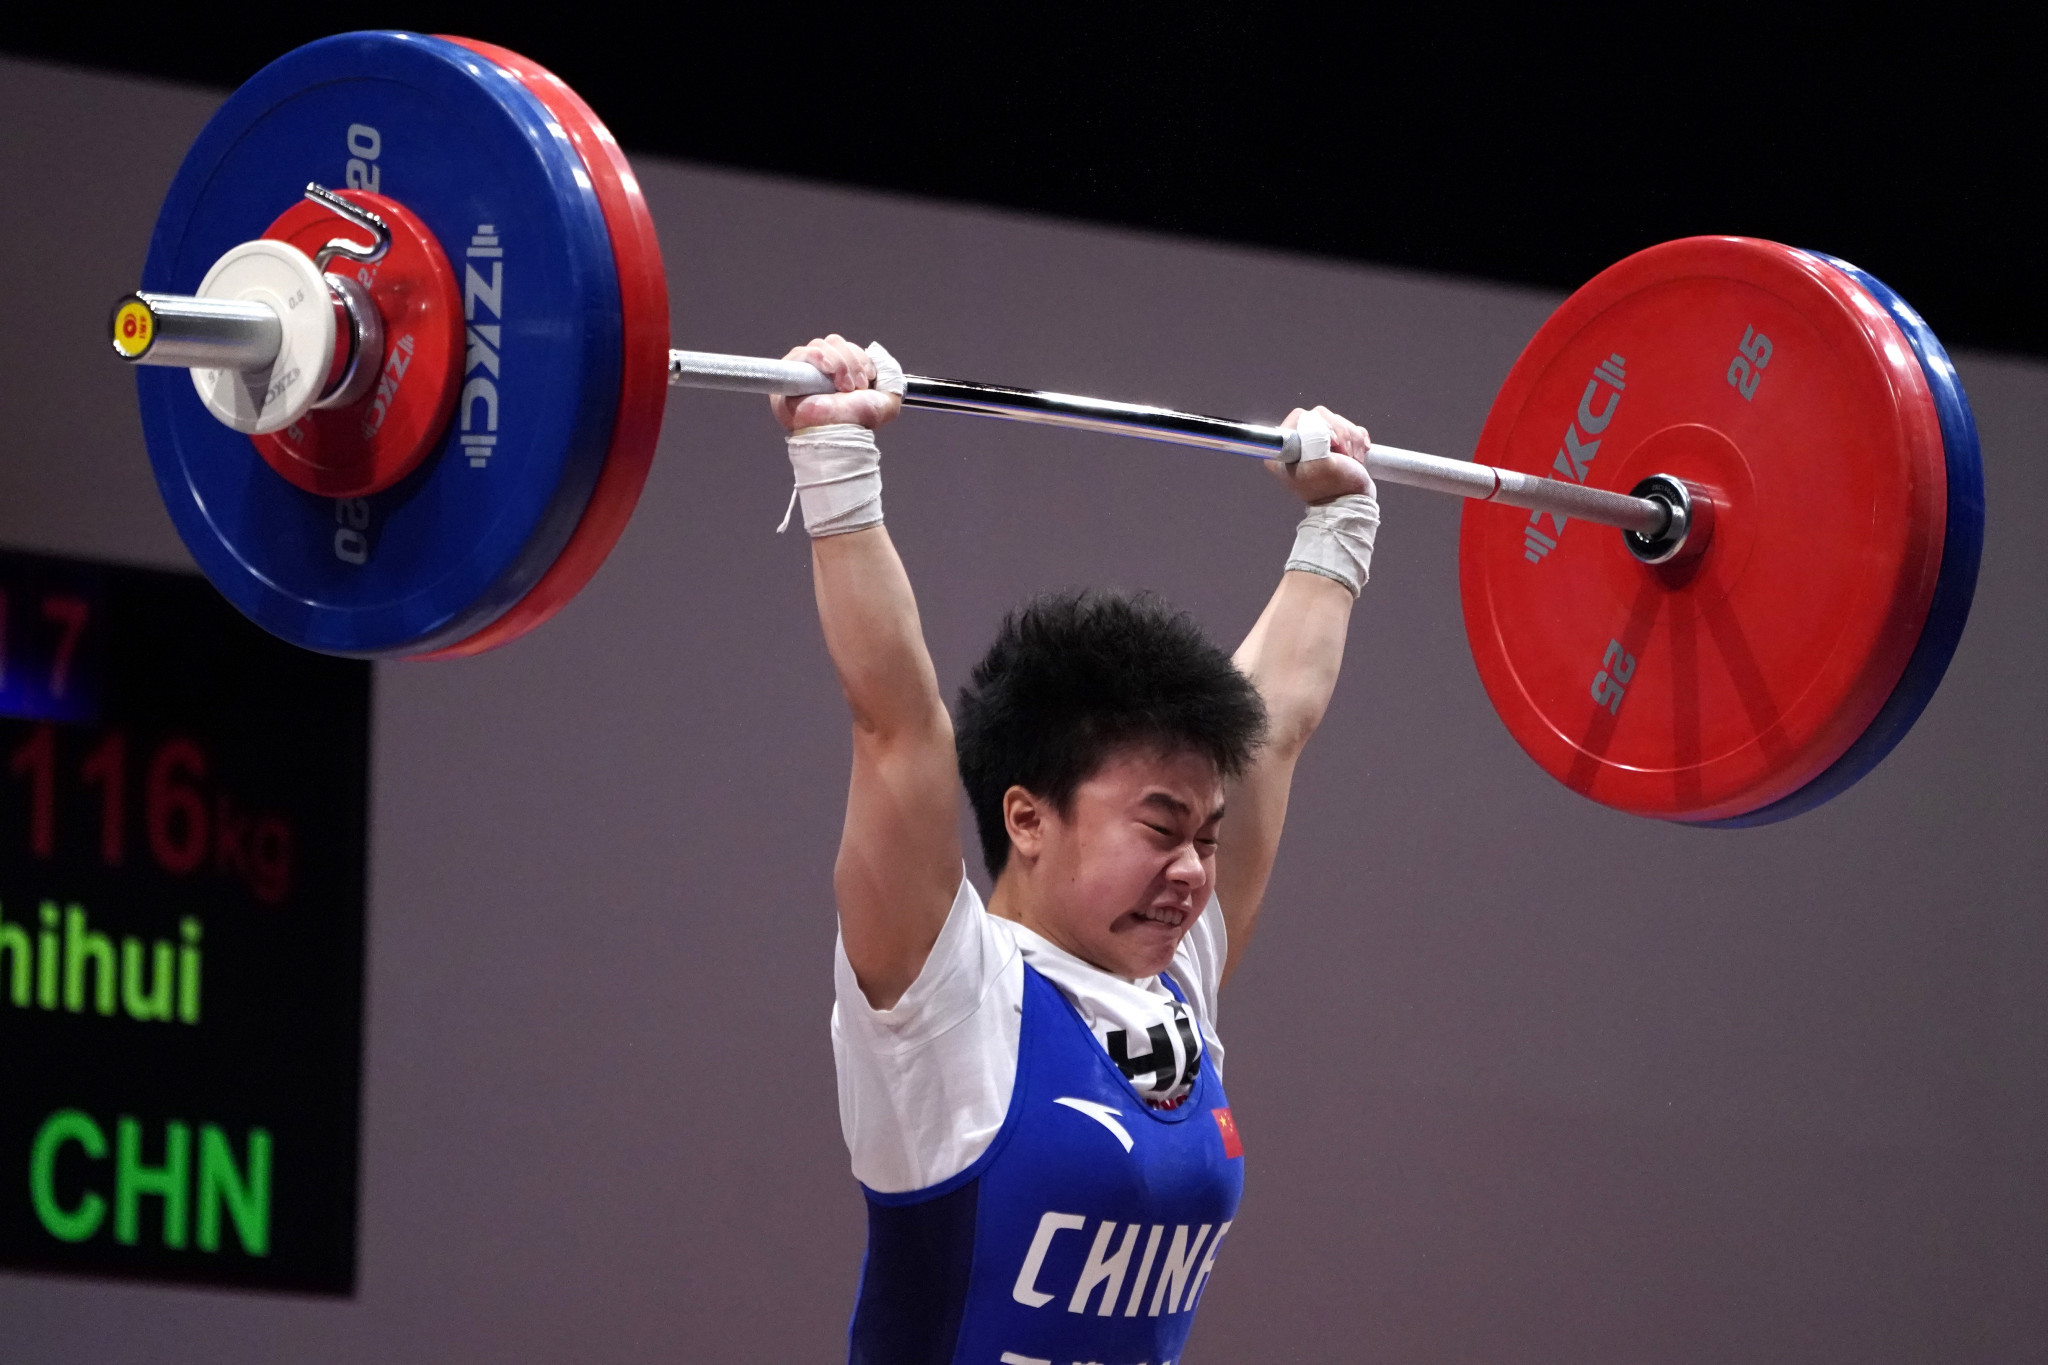 China's Hou Zhihui was the star of the first two days of the Asian Weightlifting Championships in Tashkent ©Getty Images